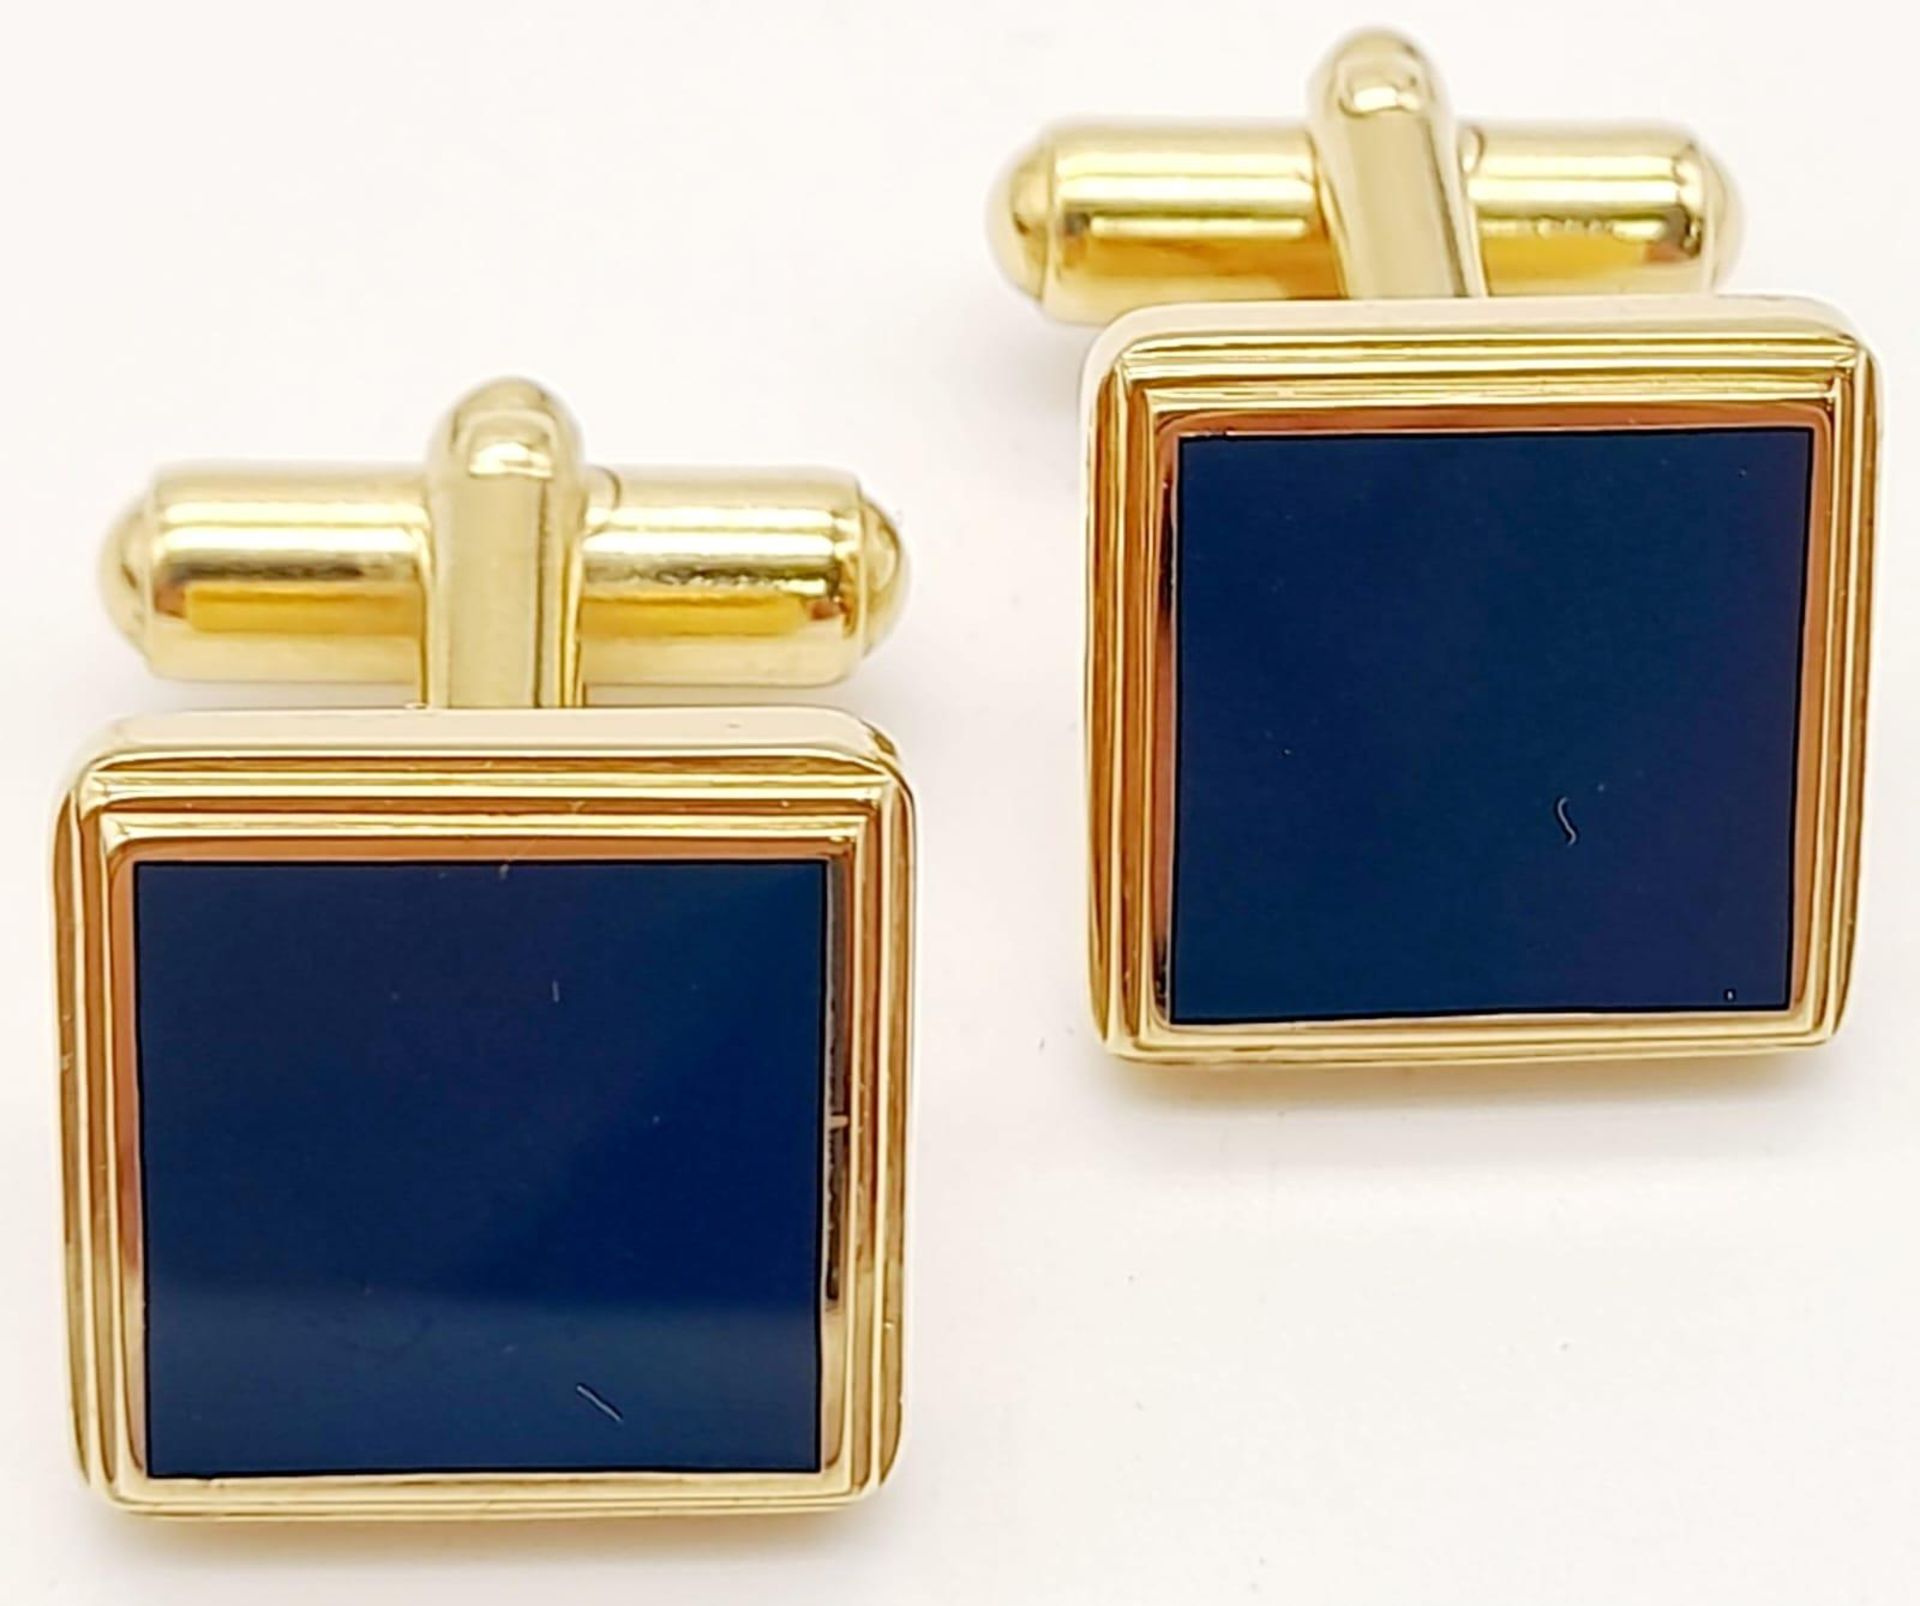 Pair of Square Yellow Gold Gilt Blue Panel Inset Cufflinks by Dunhill in their original presentation